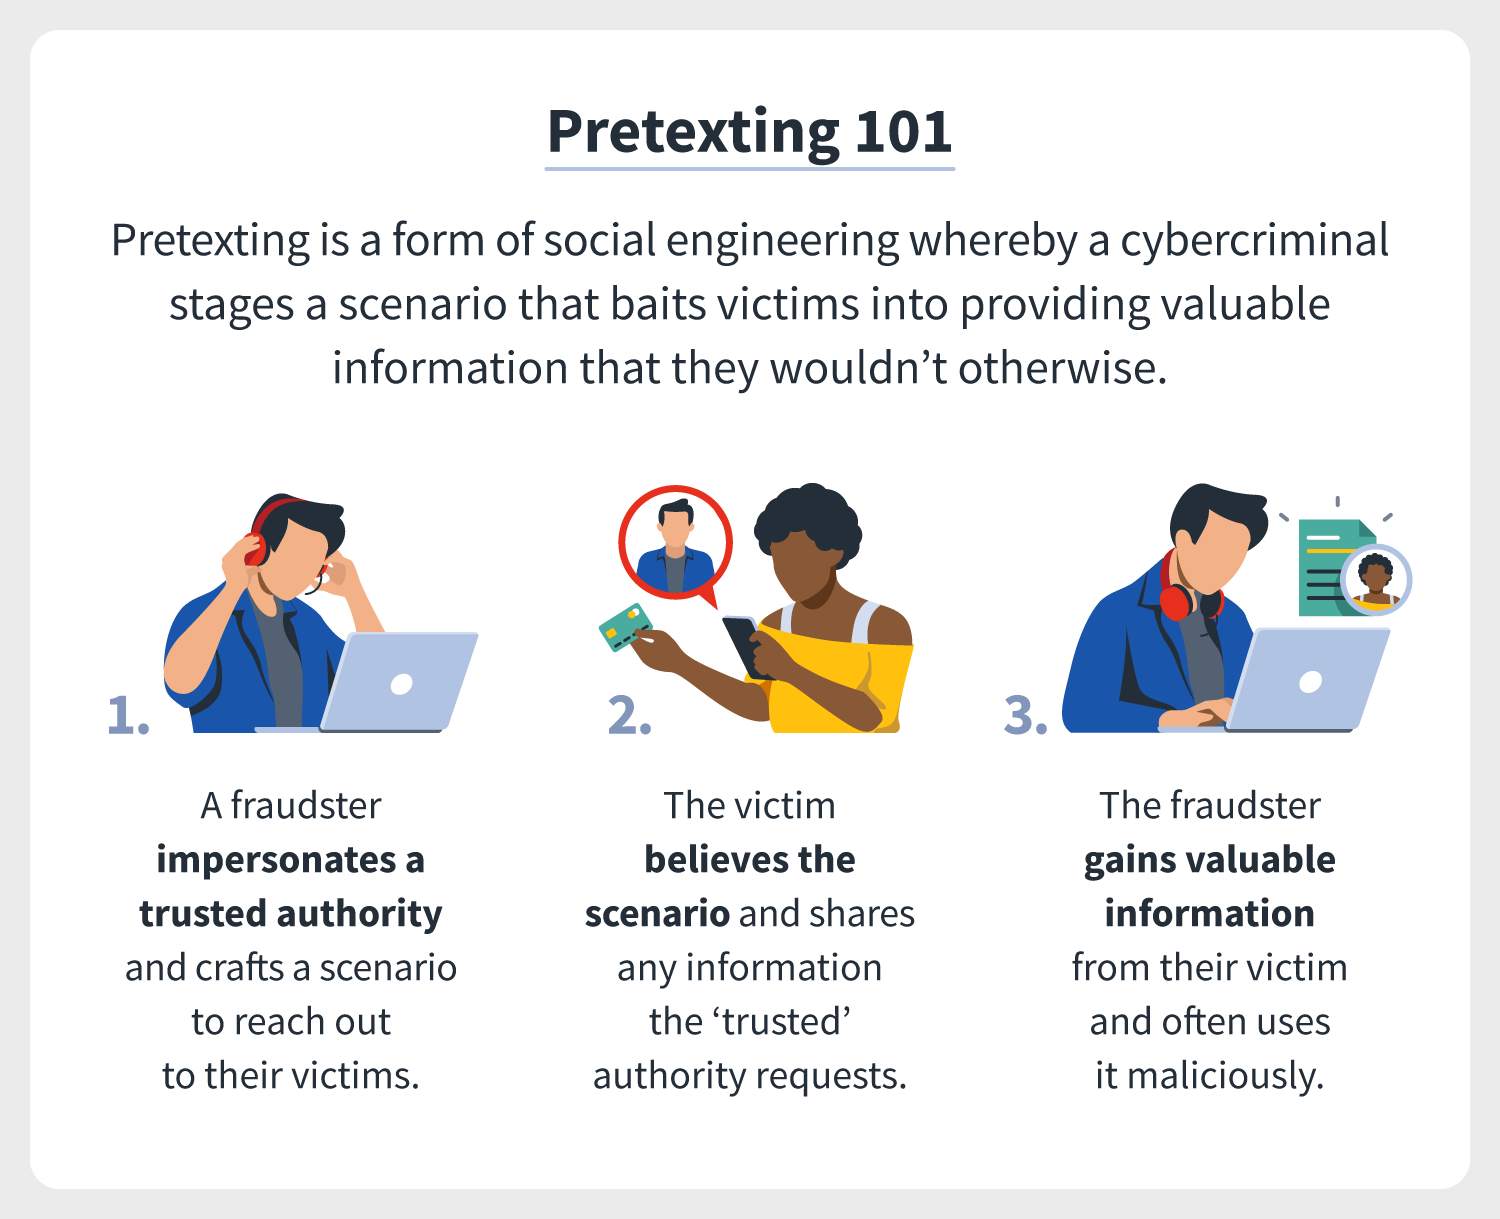 Pretexting 101: Pretexting is a form of social engineering whereby a cybercriminal stages a scenario that baits victims into providing valuable information that they wouldn’t share otherwise